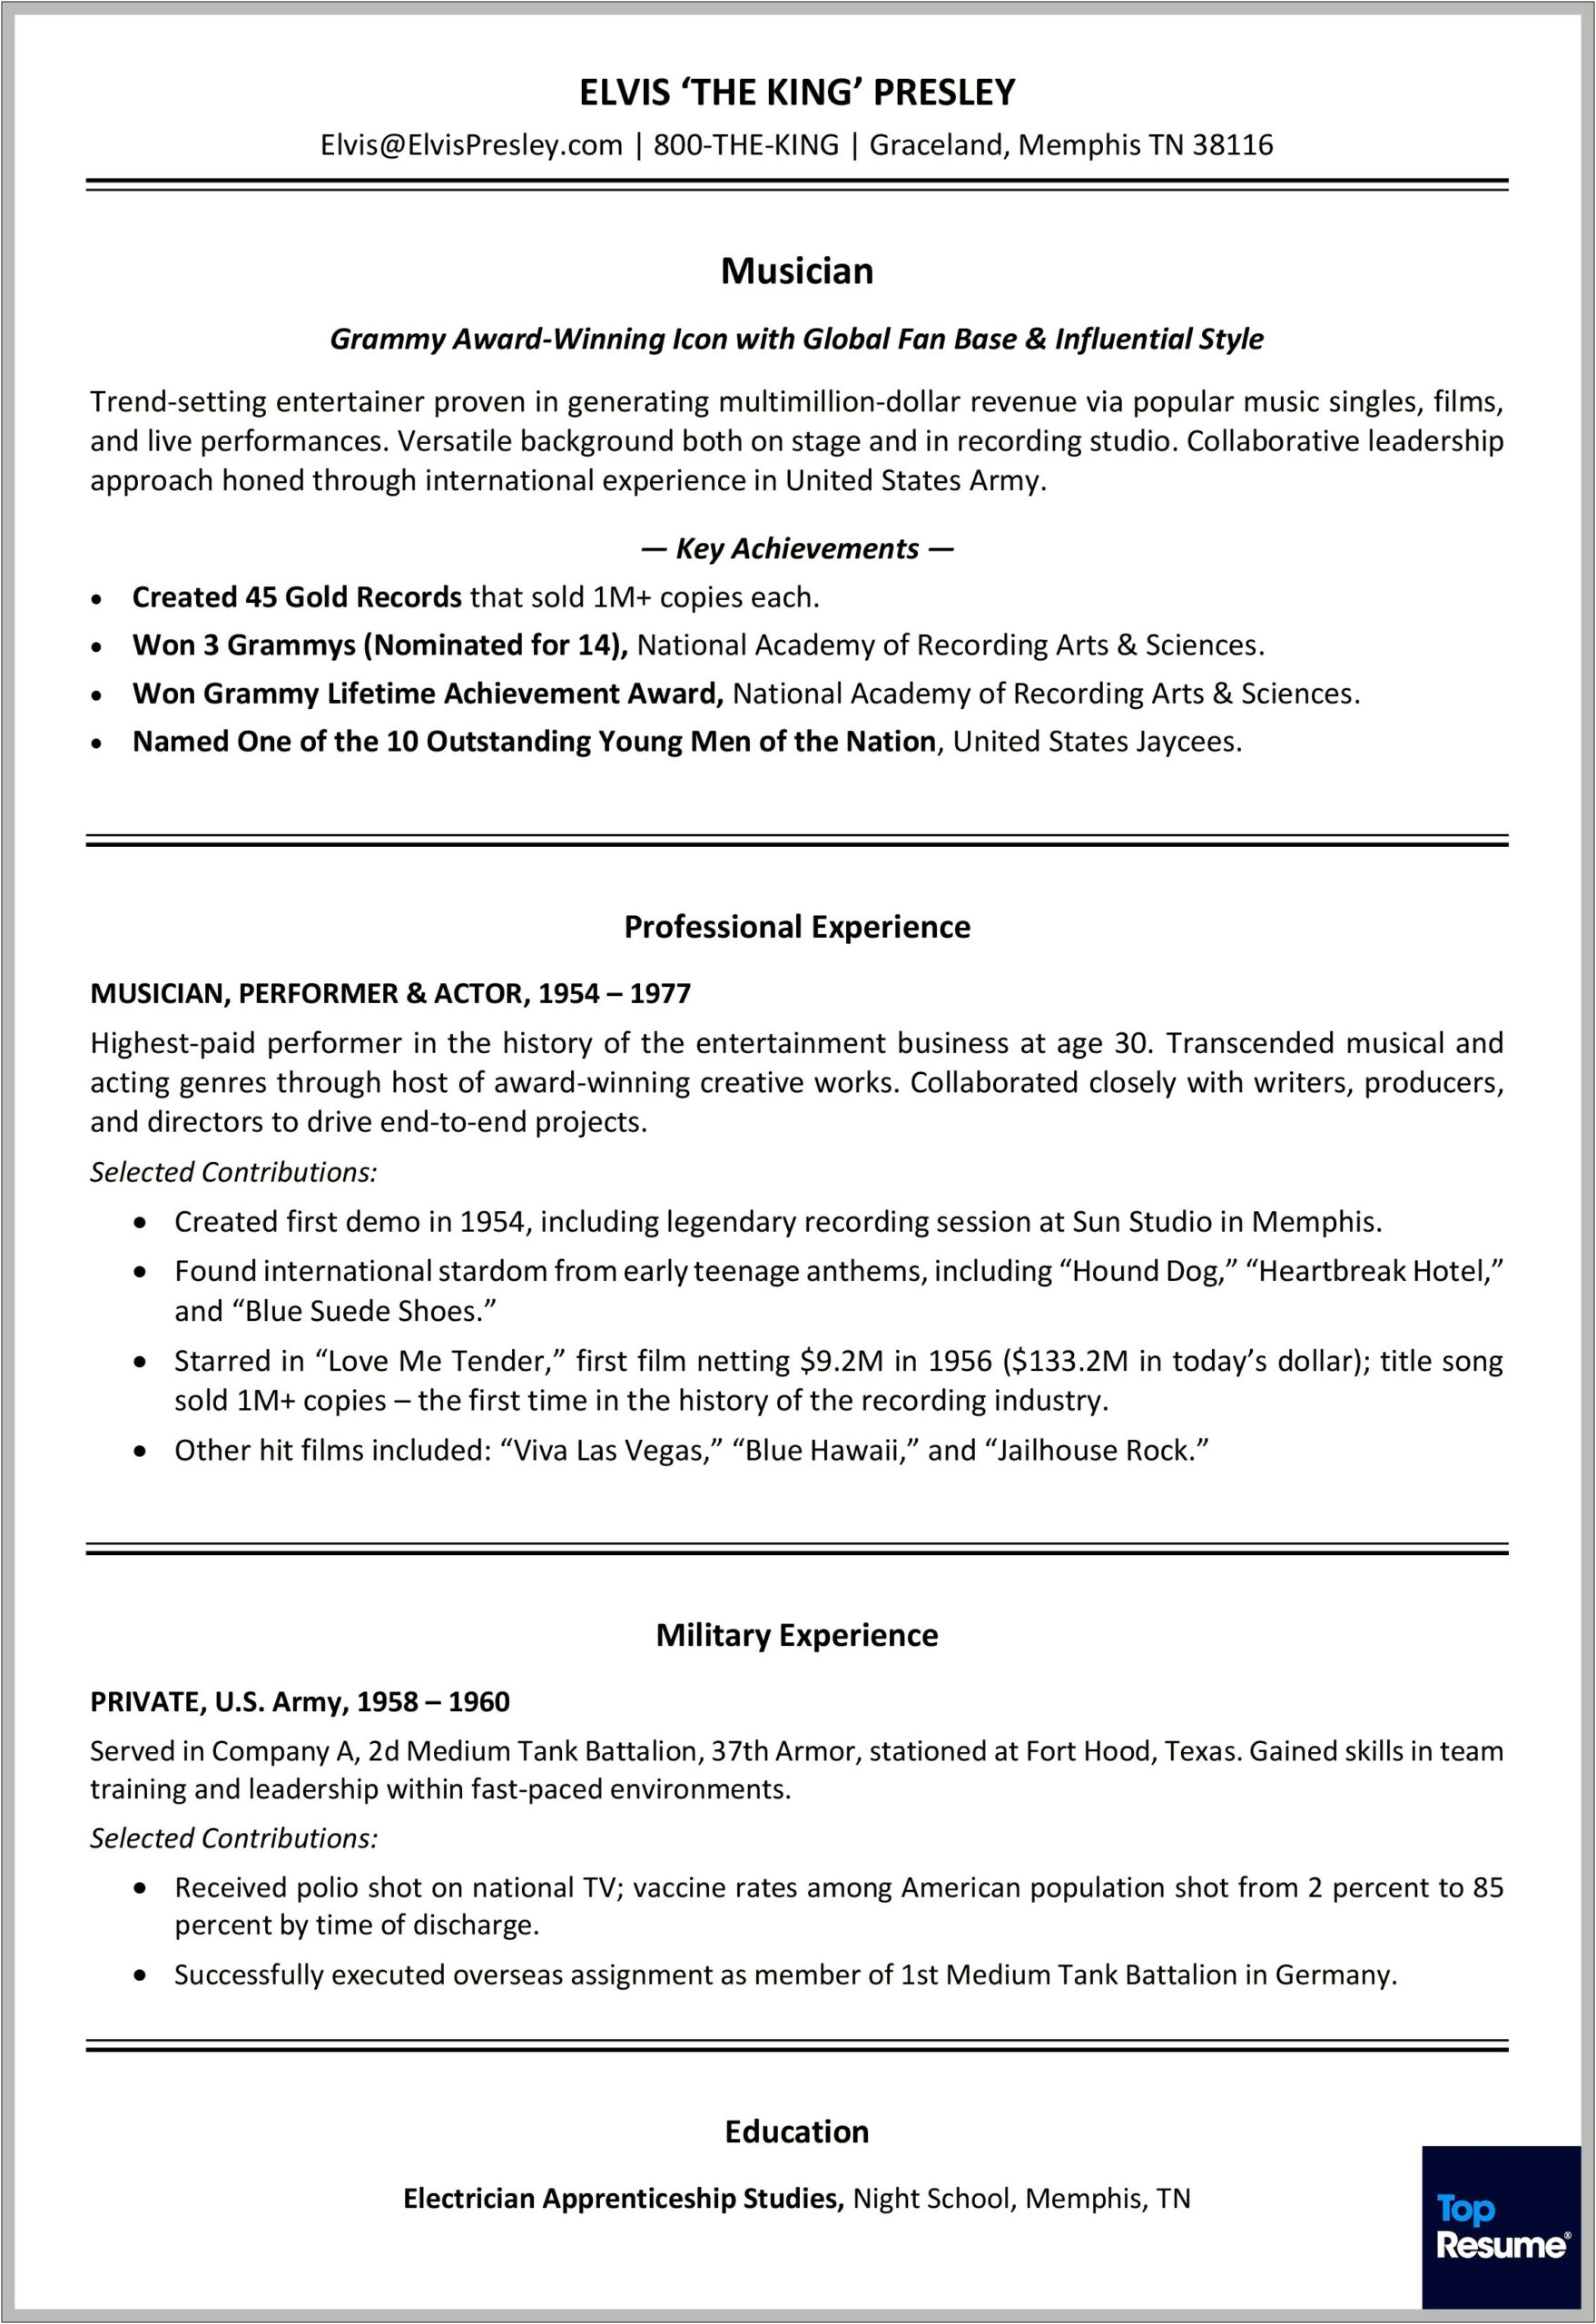 Where To Put Military Experience On A Resume